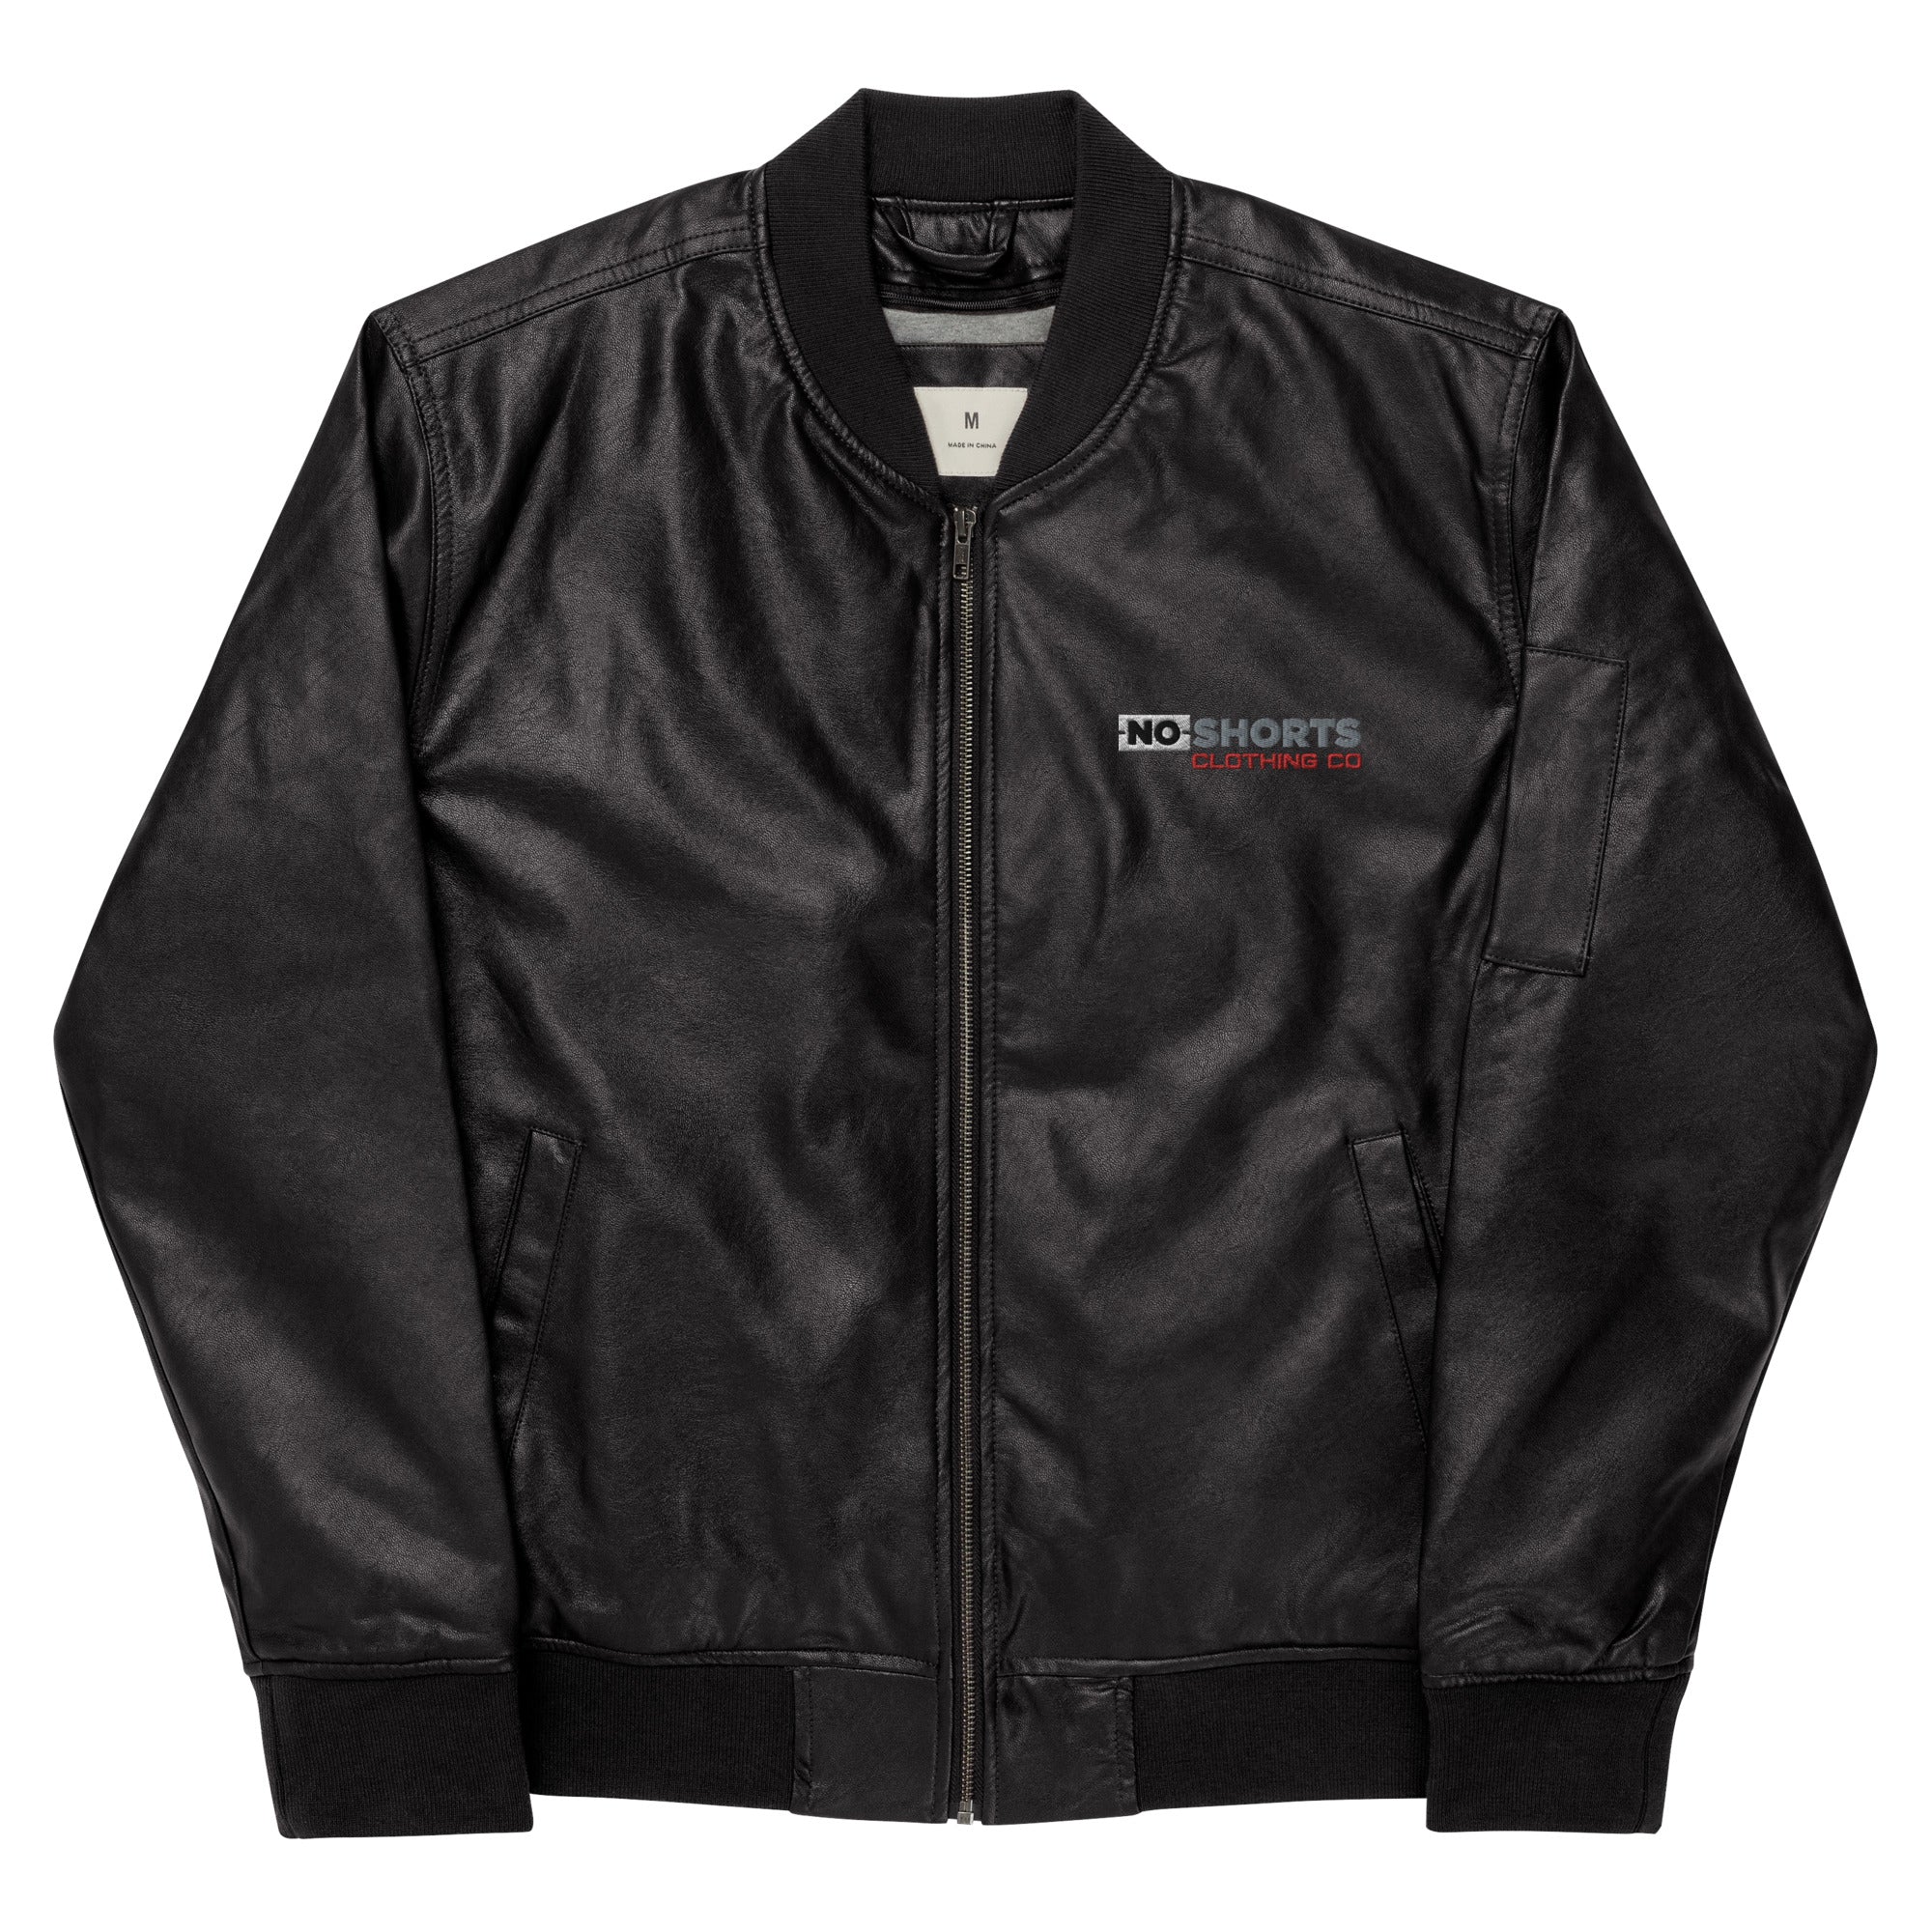 NO LOVE (embroidered) Leather(PU) Bomber Jacket